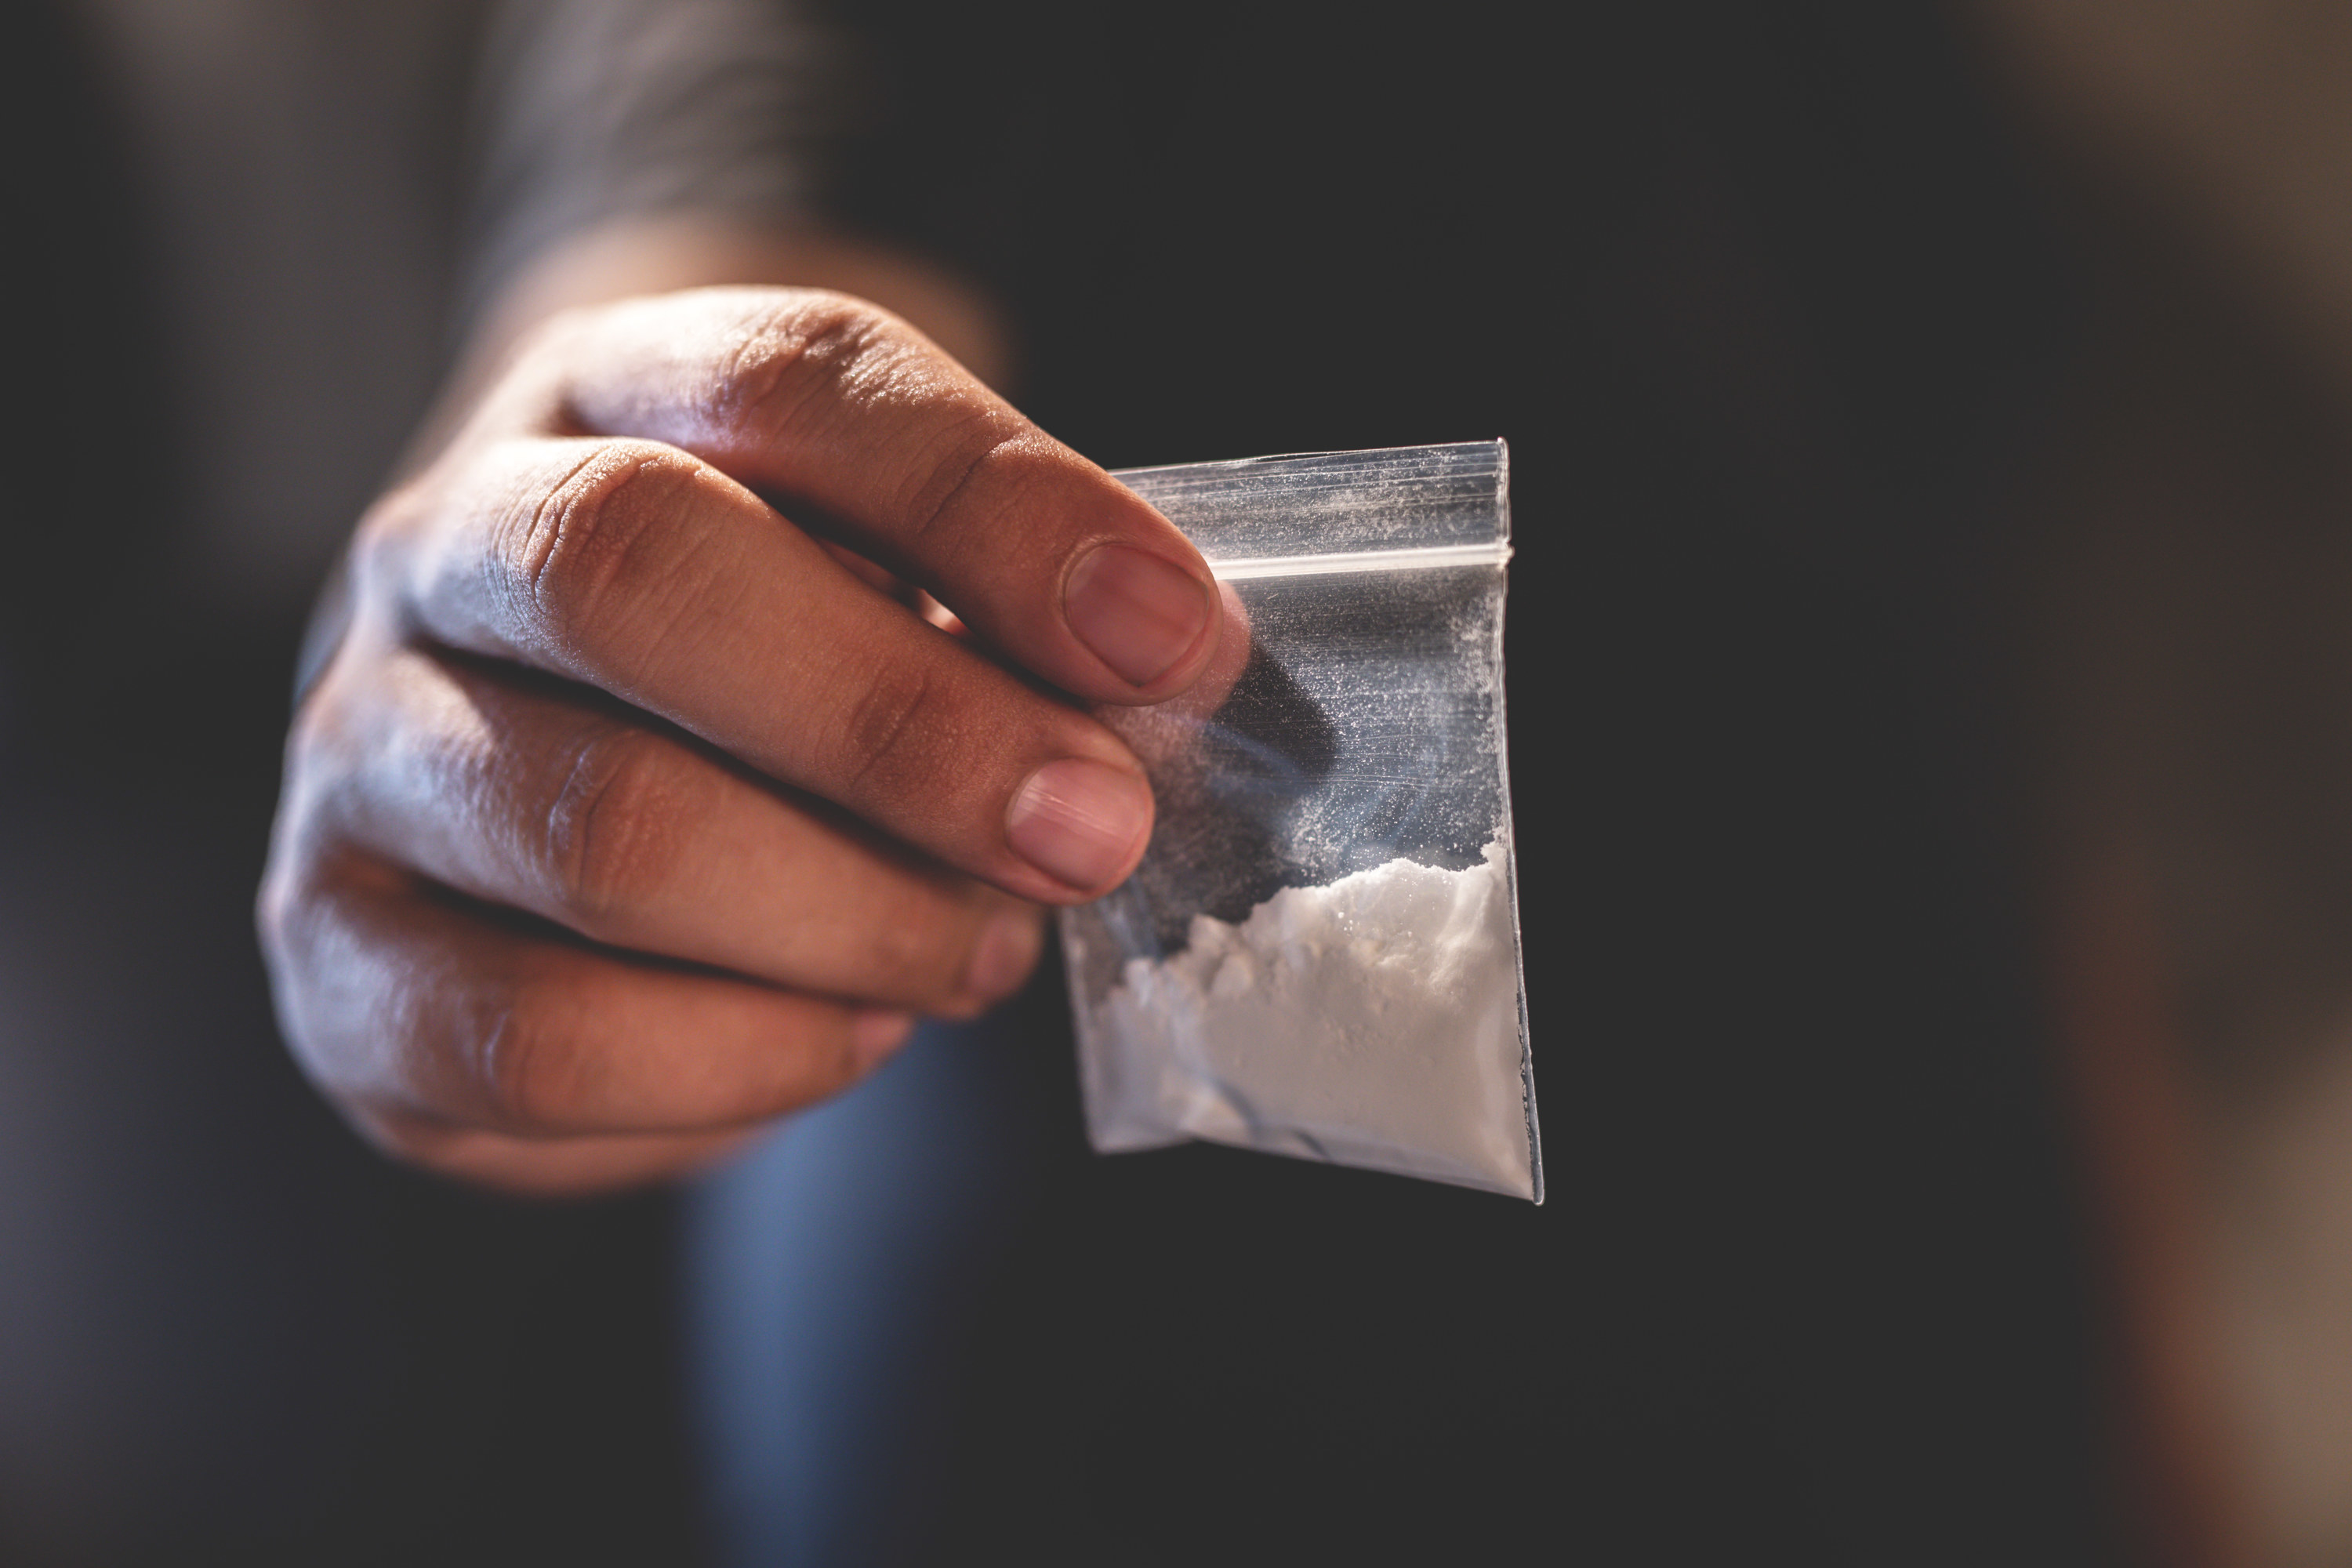 A hand holding a little baggie of cocaine